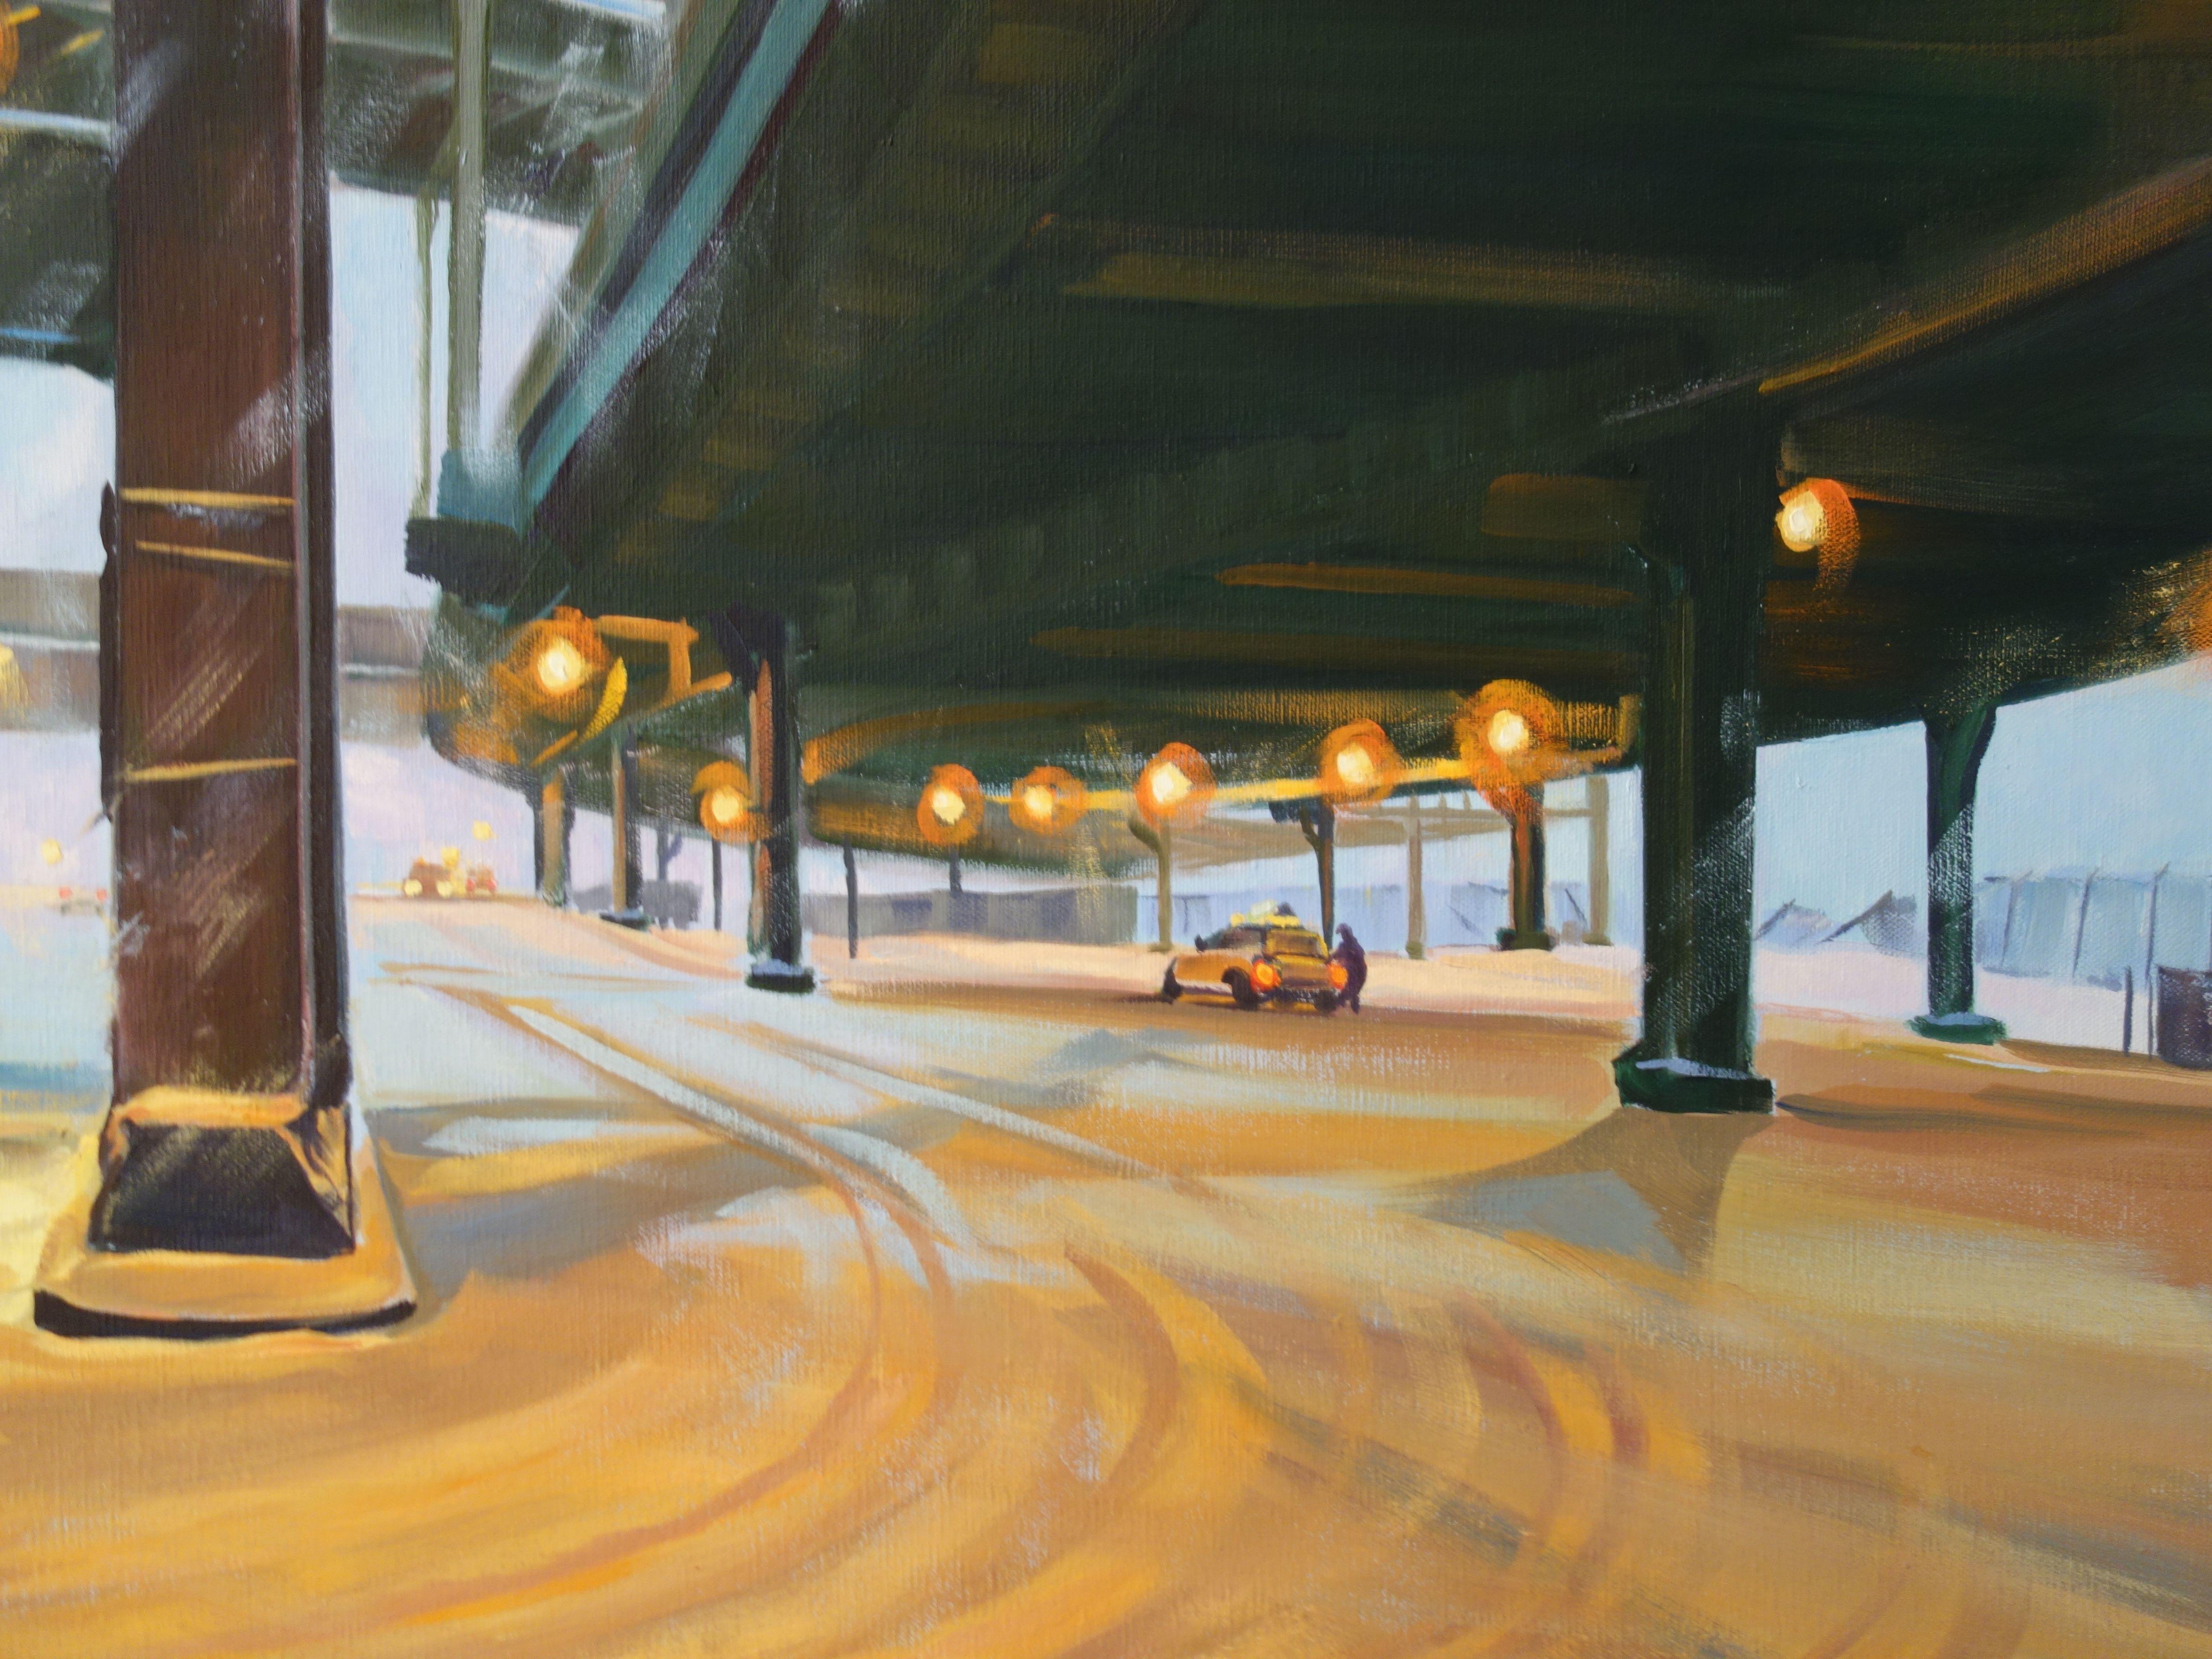 A glorious snowstorm in lower Manhattan under the FDR Drive and Brooklyn Bridge, with swirling snow and glowing cab lights, and lone figures looking to escape the storm. South Street in Lower Manhattan transformed by winter magic. :: Painting ::